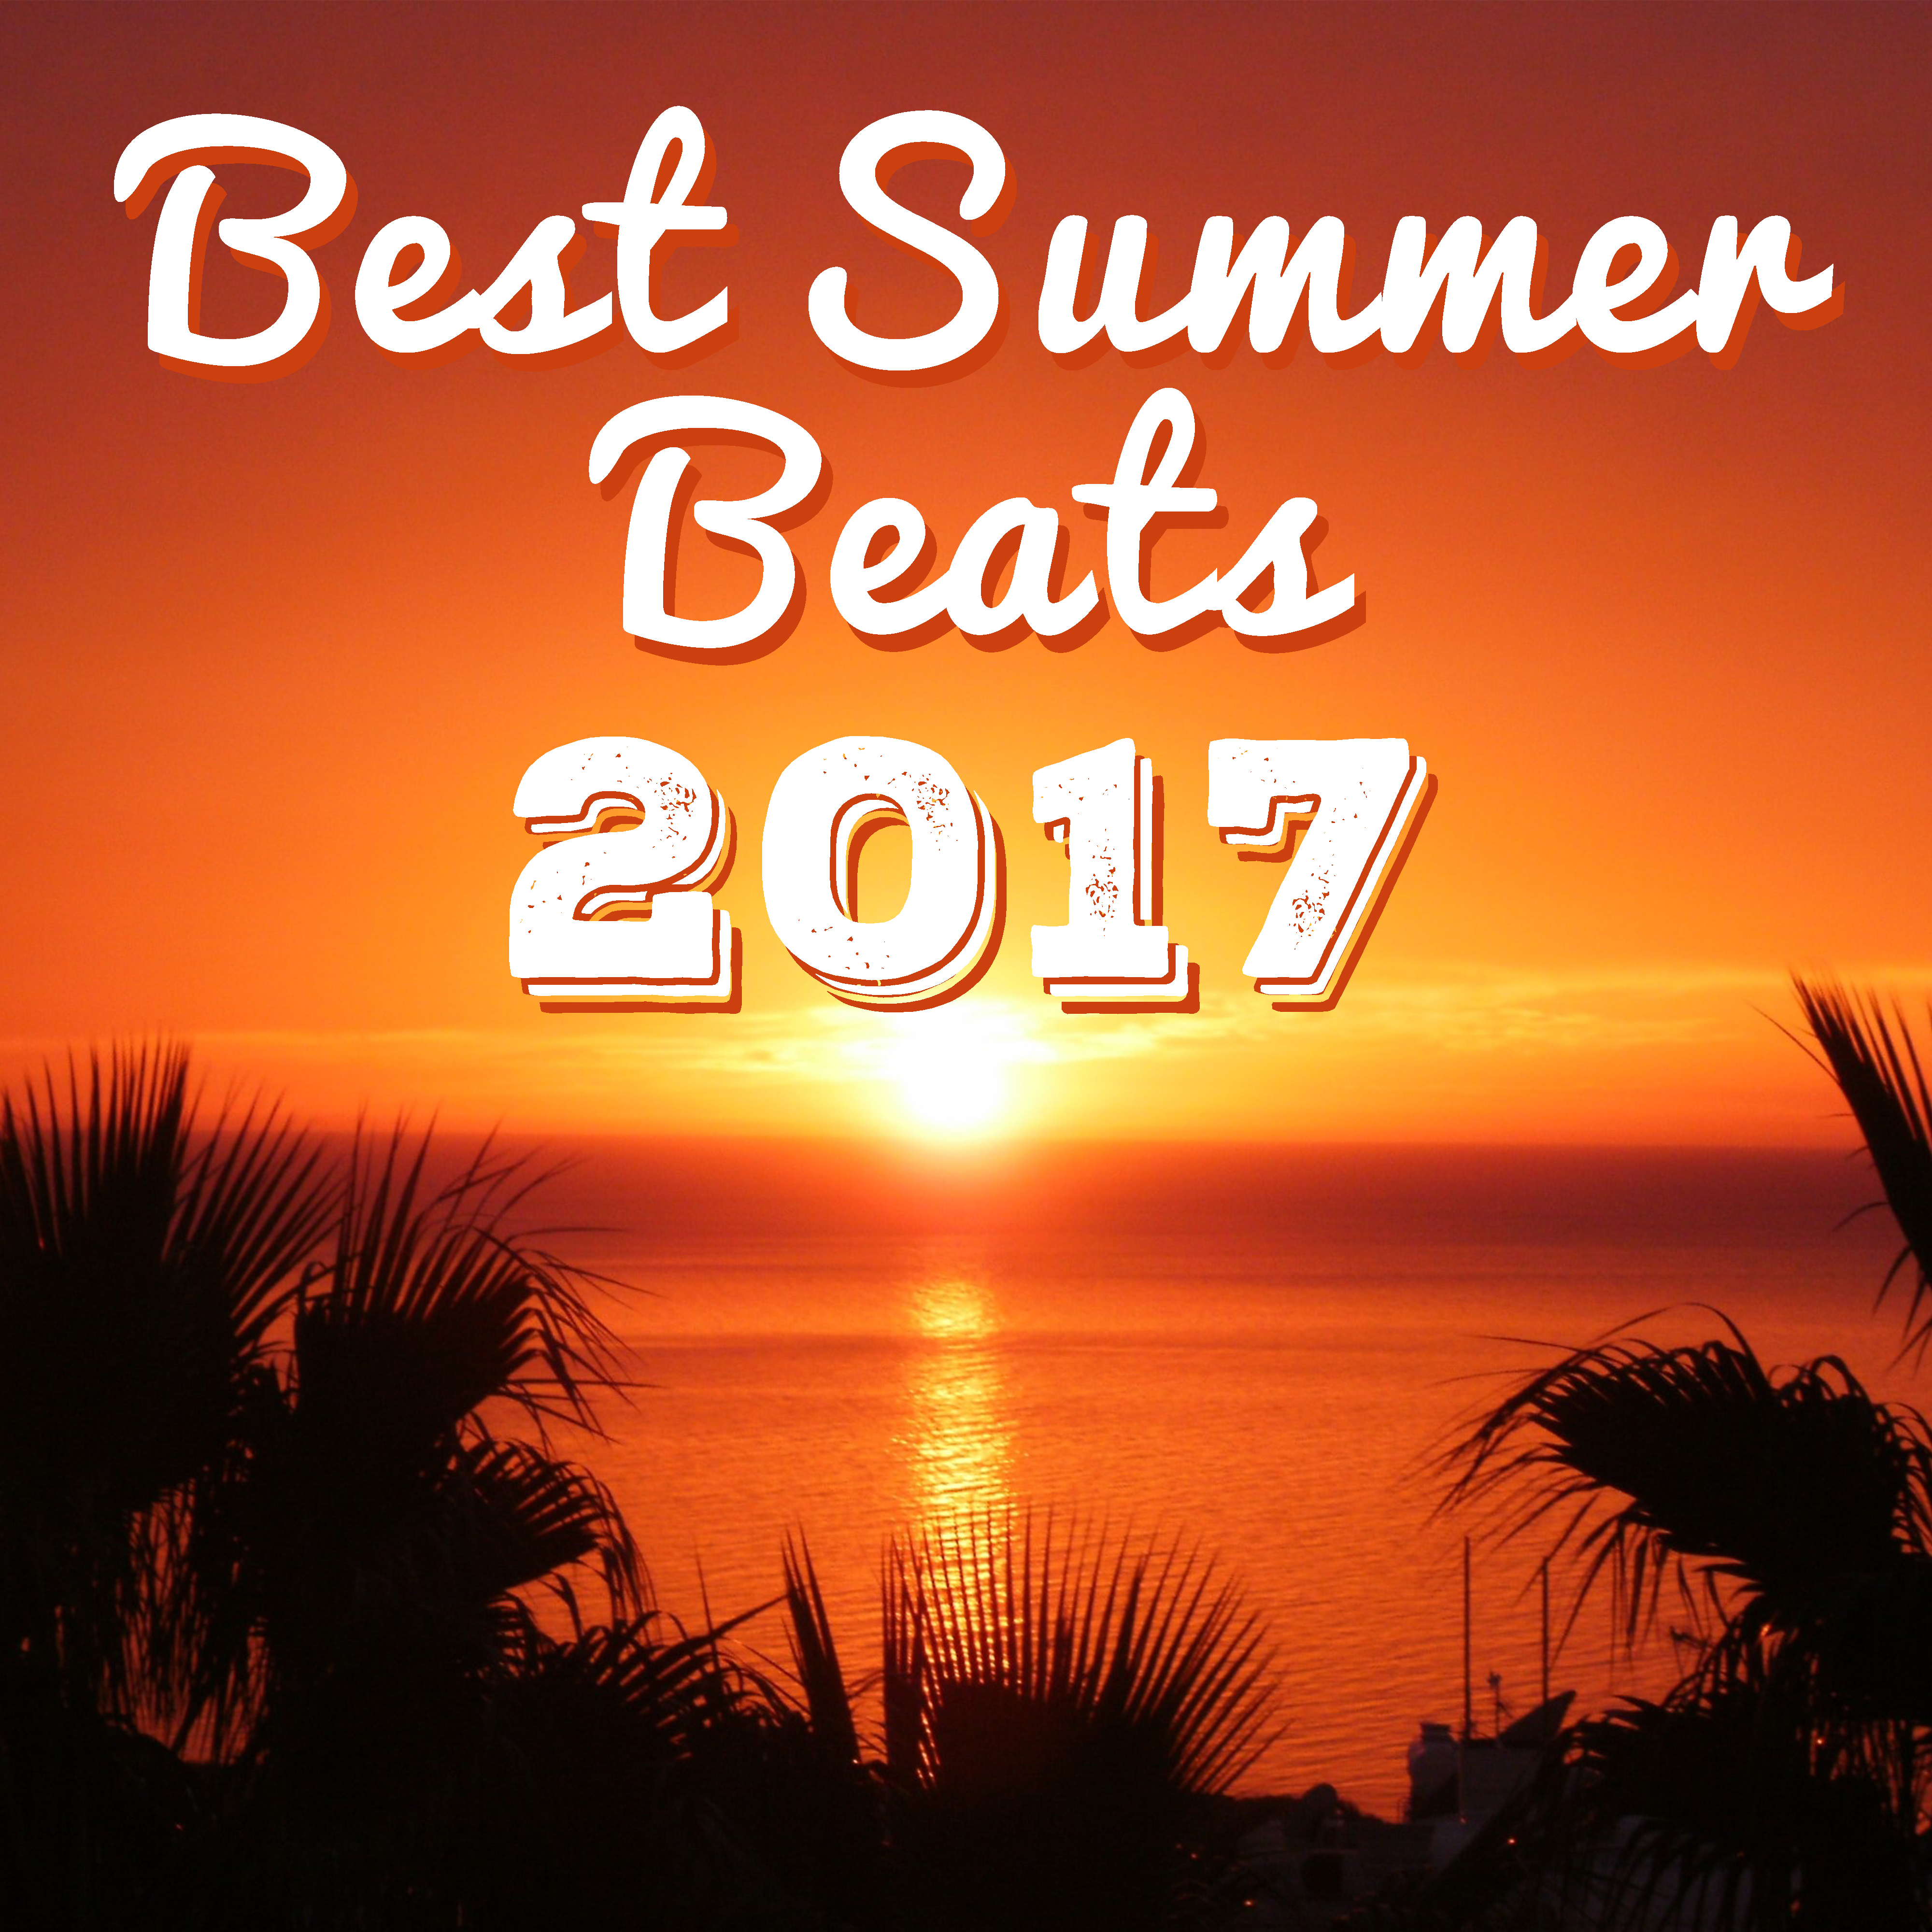 Best Summer Beats 2017  Chilled Songs, Deep Chill Out Lounge, Summer Rest, Holiday Beach Music, Tropical Island